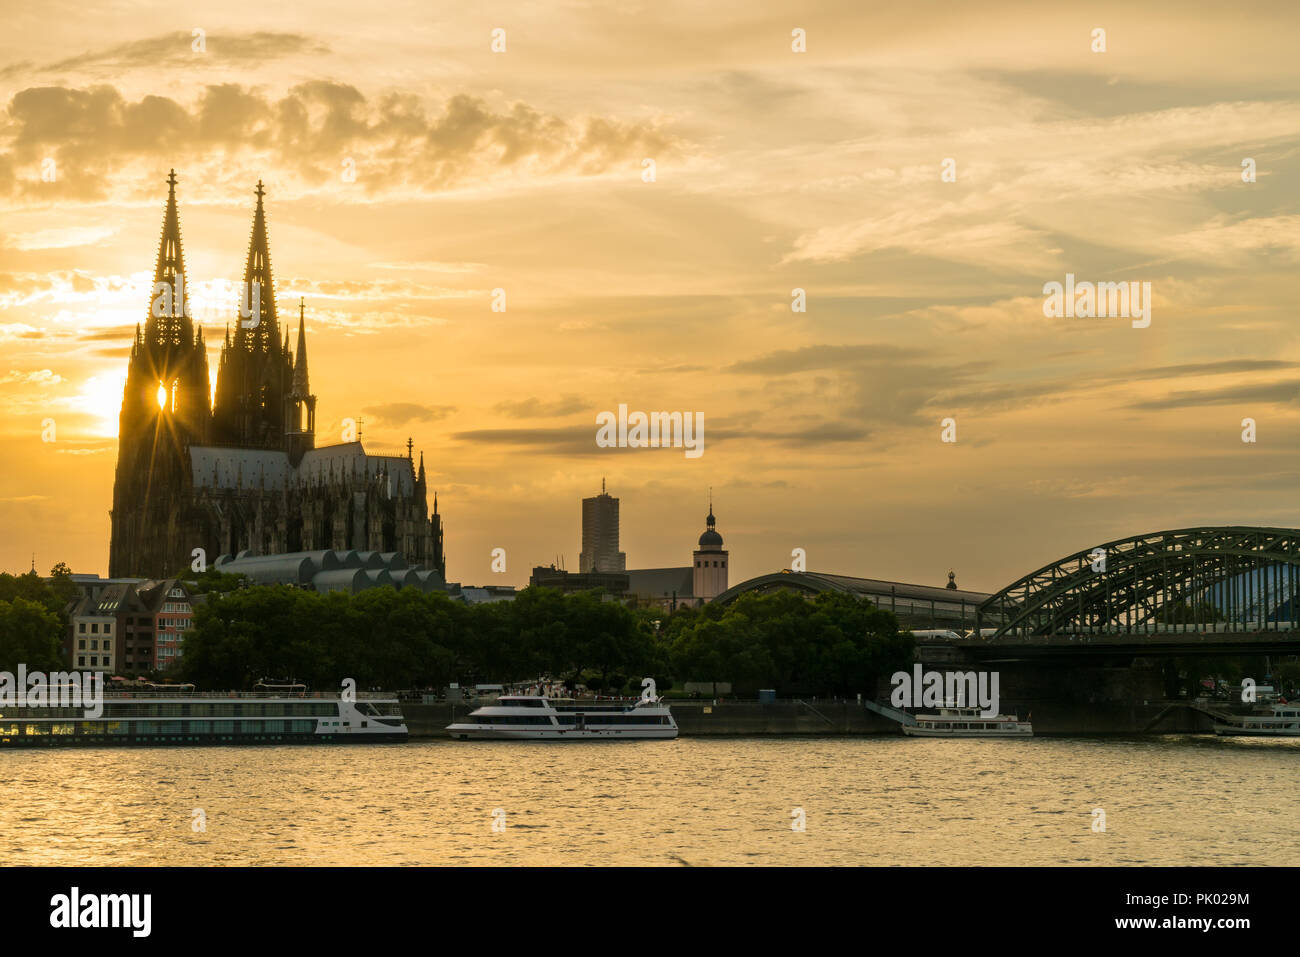 Sunset behind the twin gothic spires of Cologne Cathedral along side the Hohenzollern Bridge and river cruise boats on the River Rhine, Germany, Europ Stock Photo